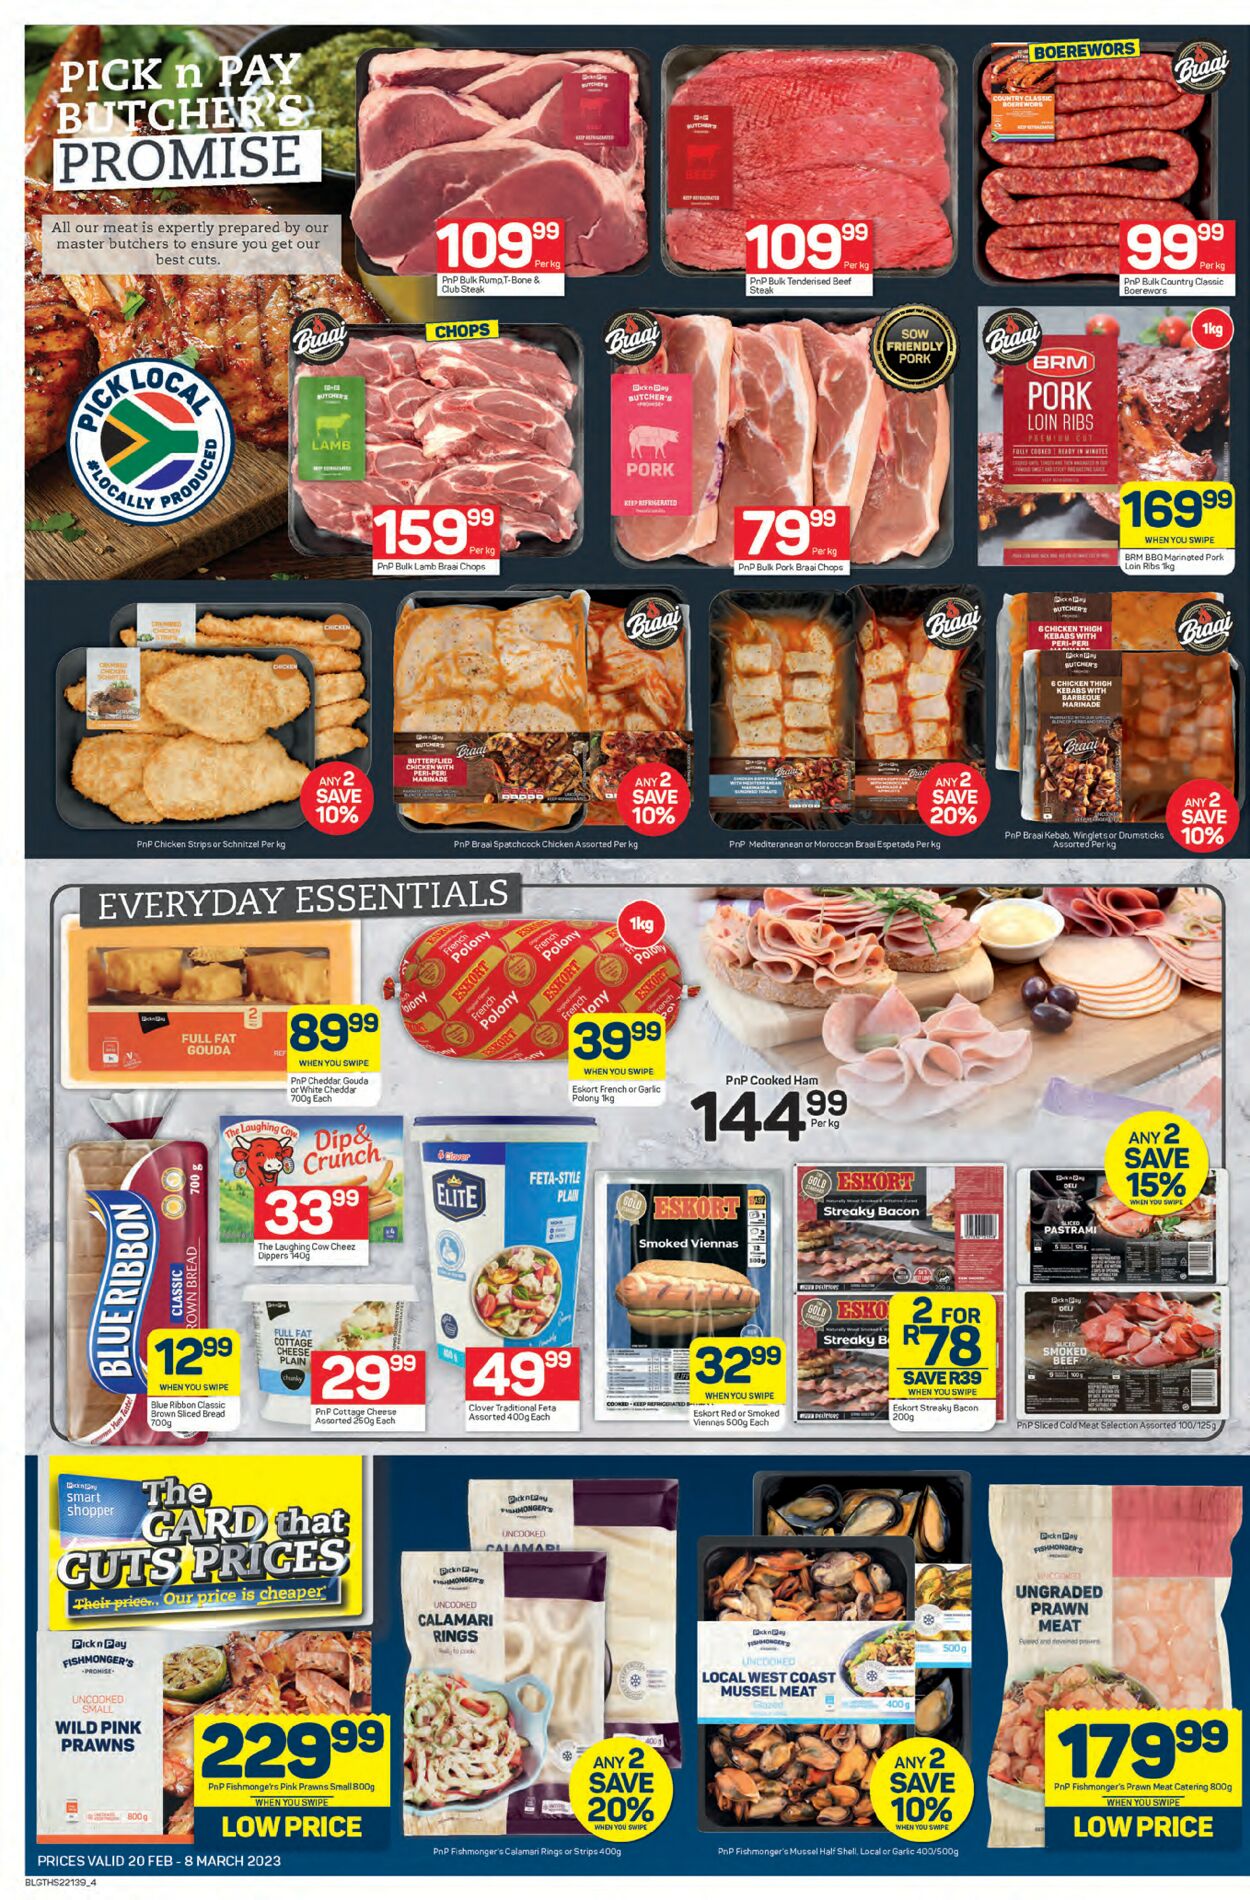 Pick n Pay Catalogue - 2023/02/20-2023/03/08 (Page 4)